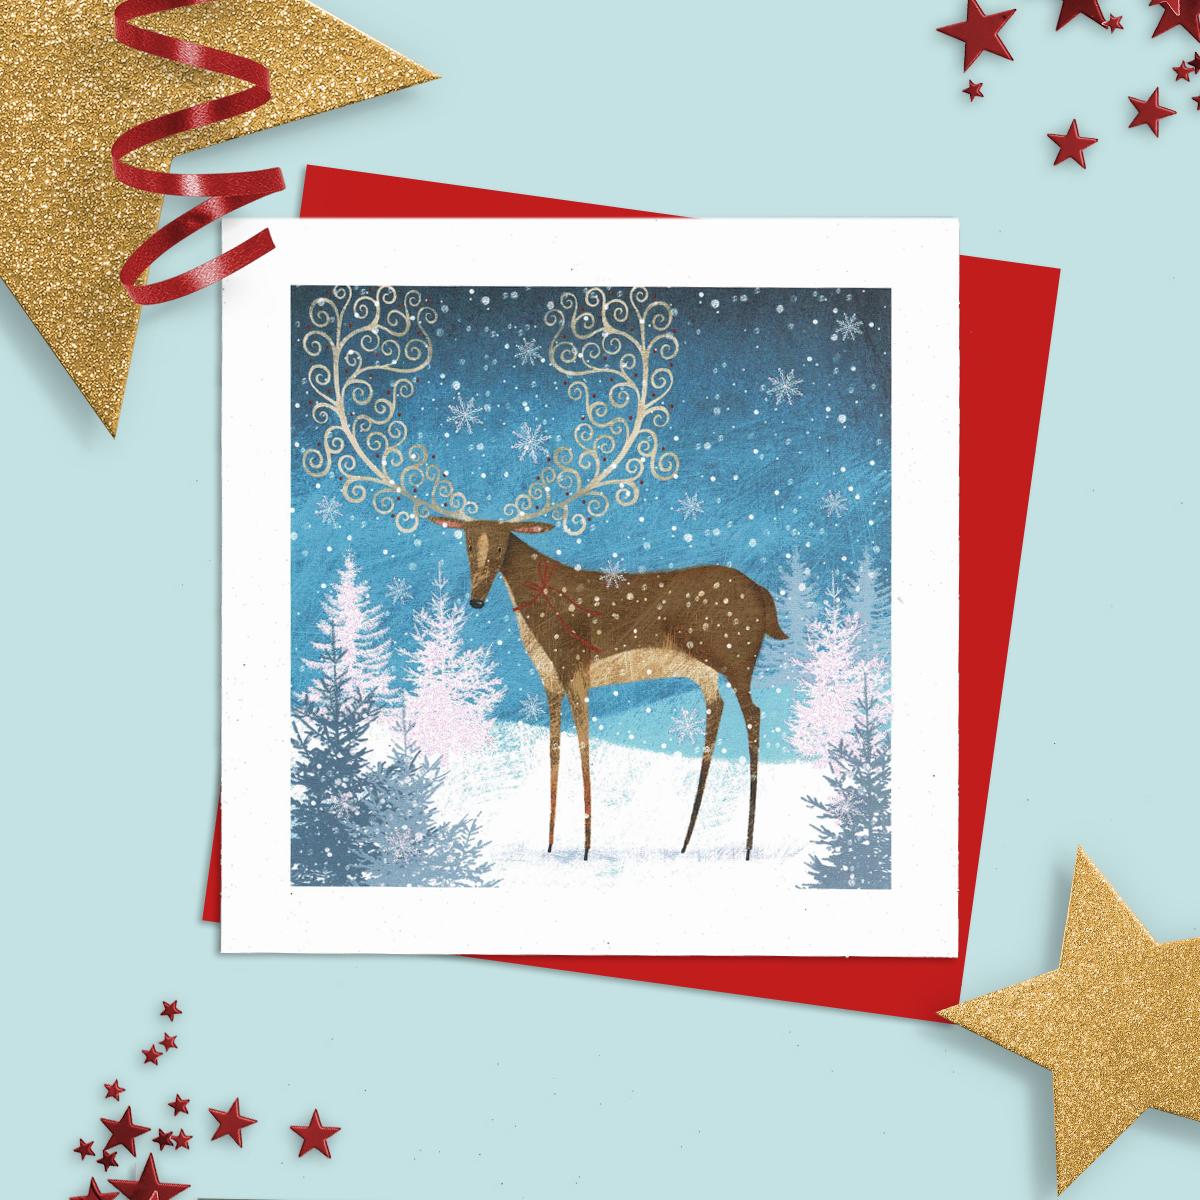 General Christmas Card Featuring A Reindeer In Winter With Beautiful Decorated Antlers. Added Sparkle And Red Envelope To Finish